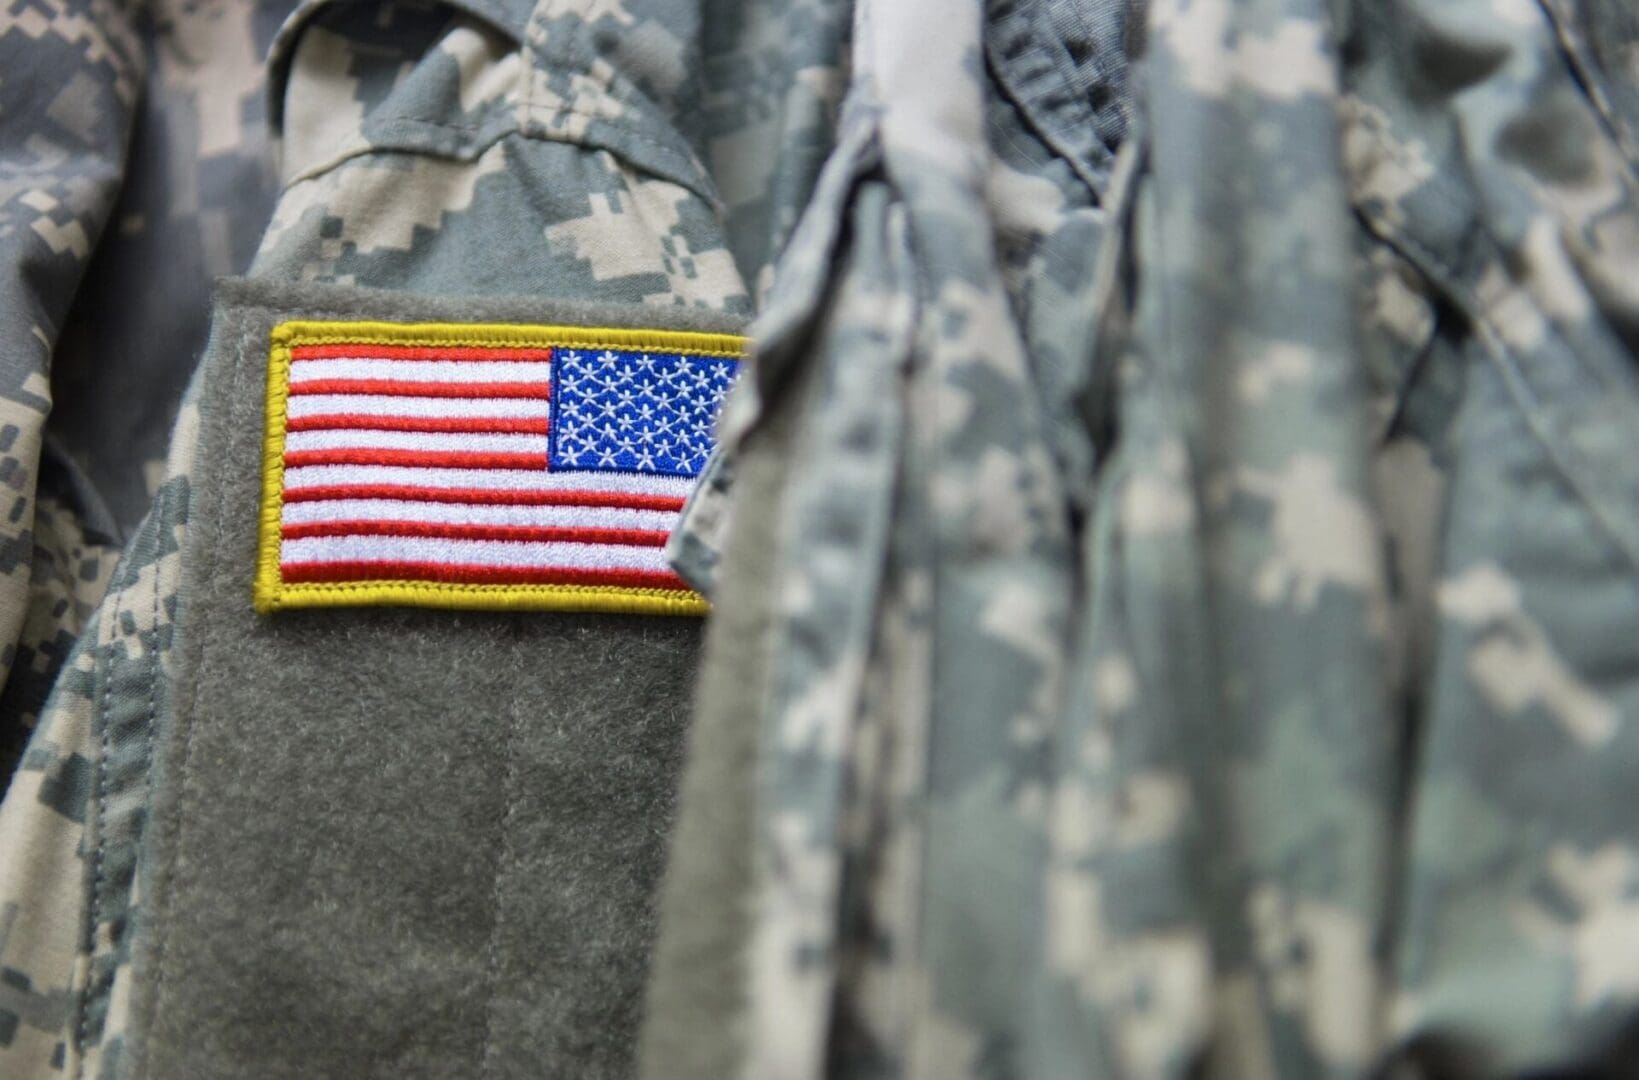 A close up of an american flag on a camouflage uniform.